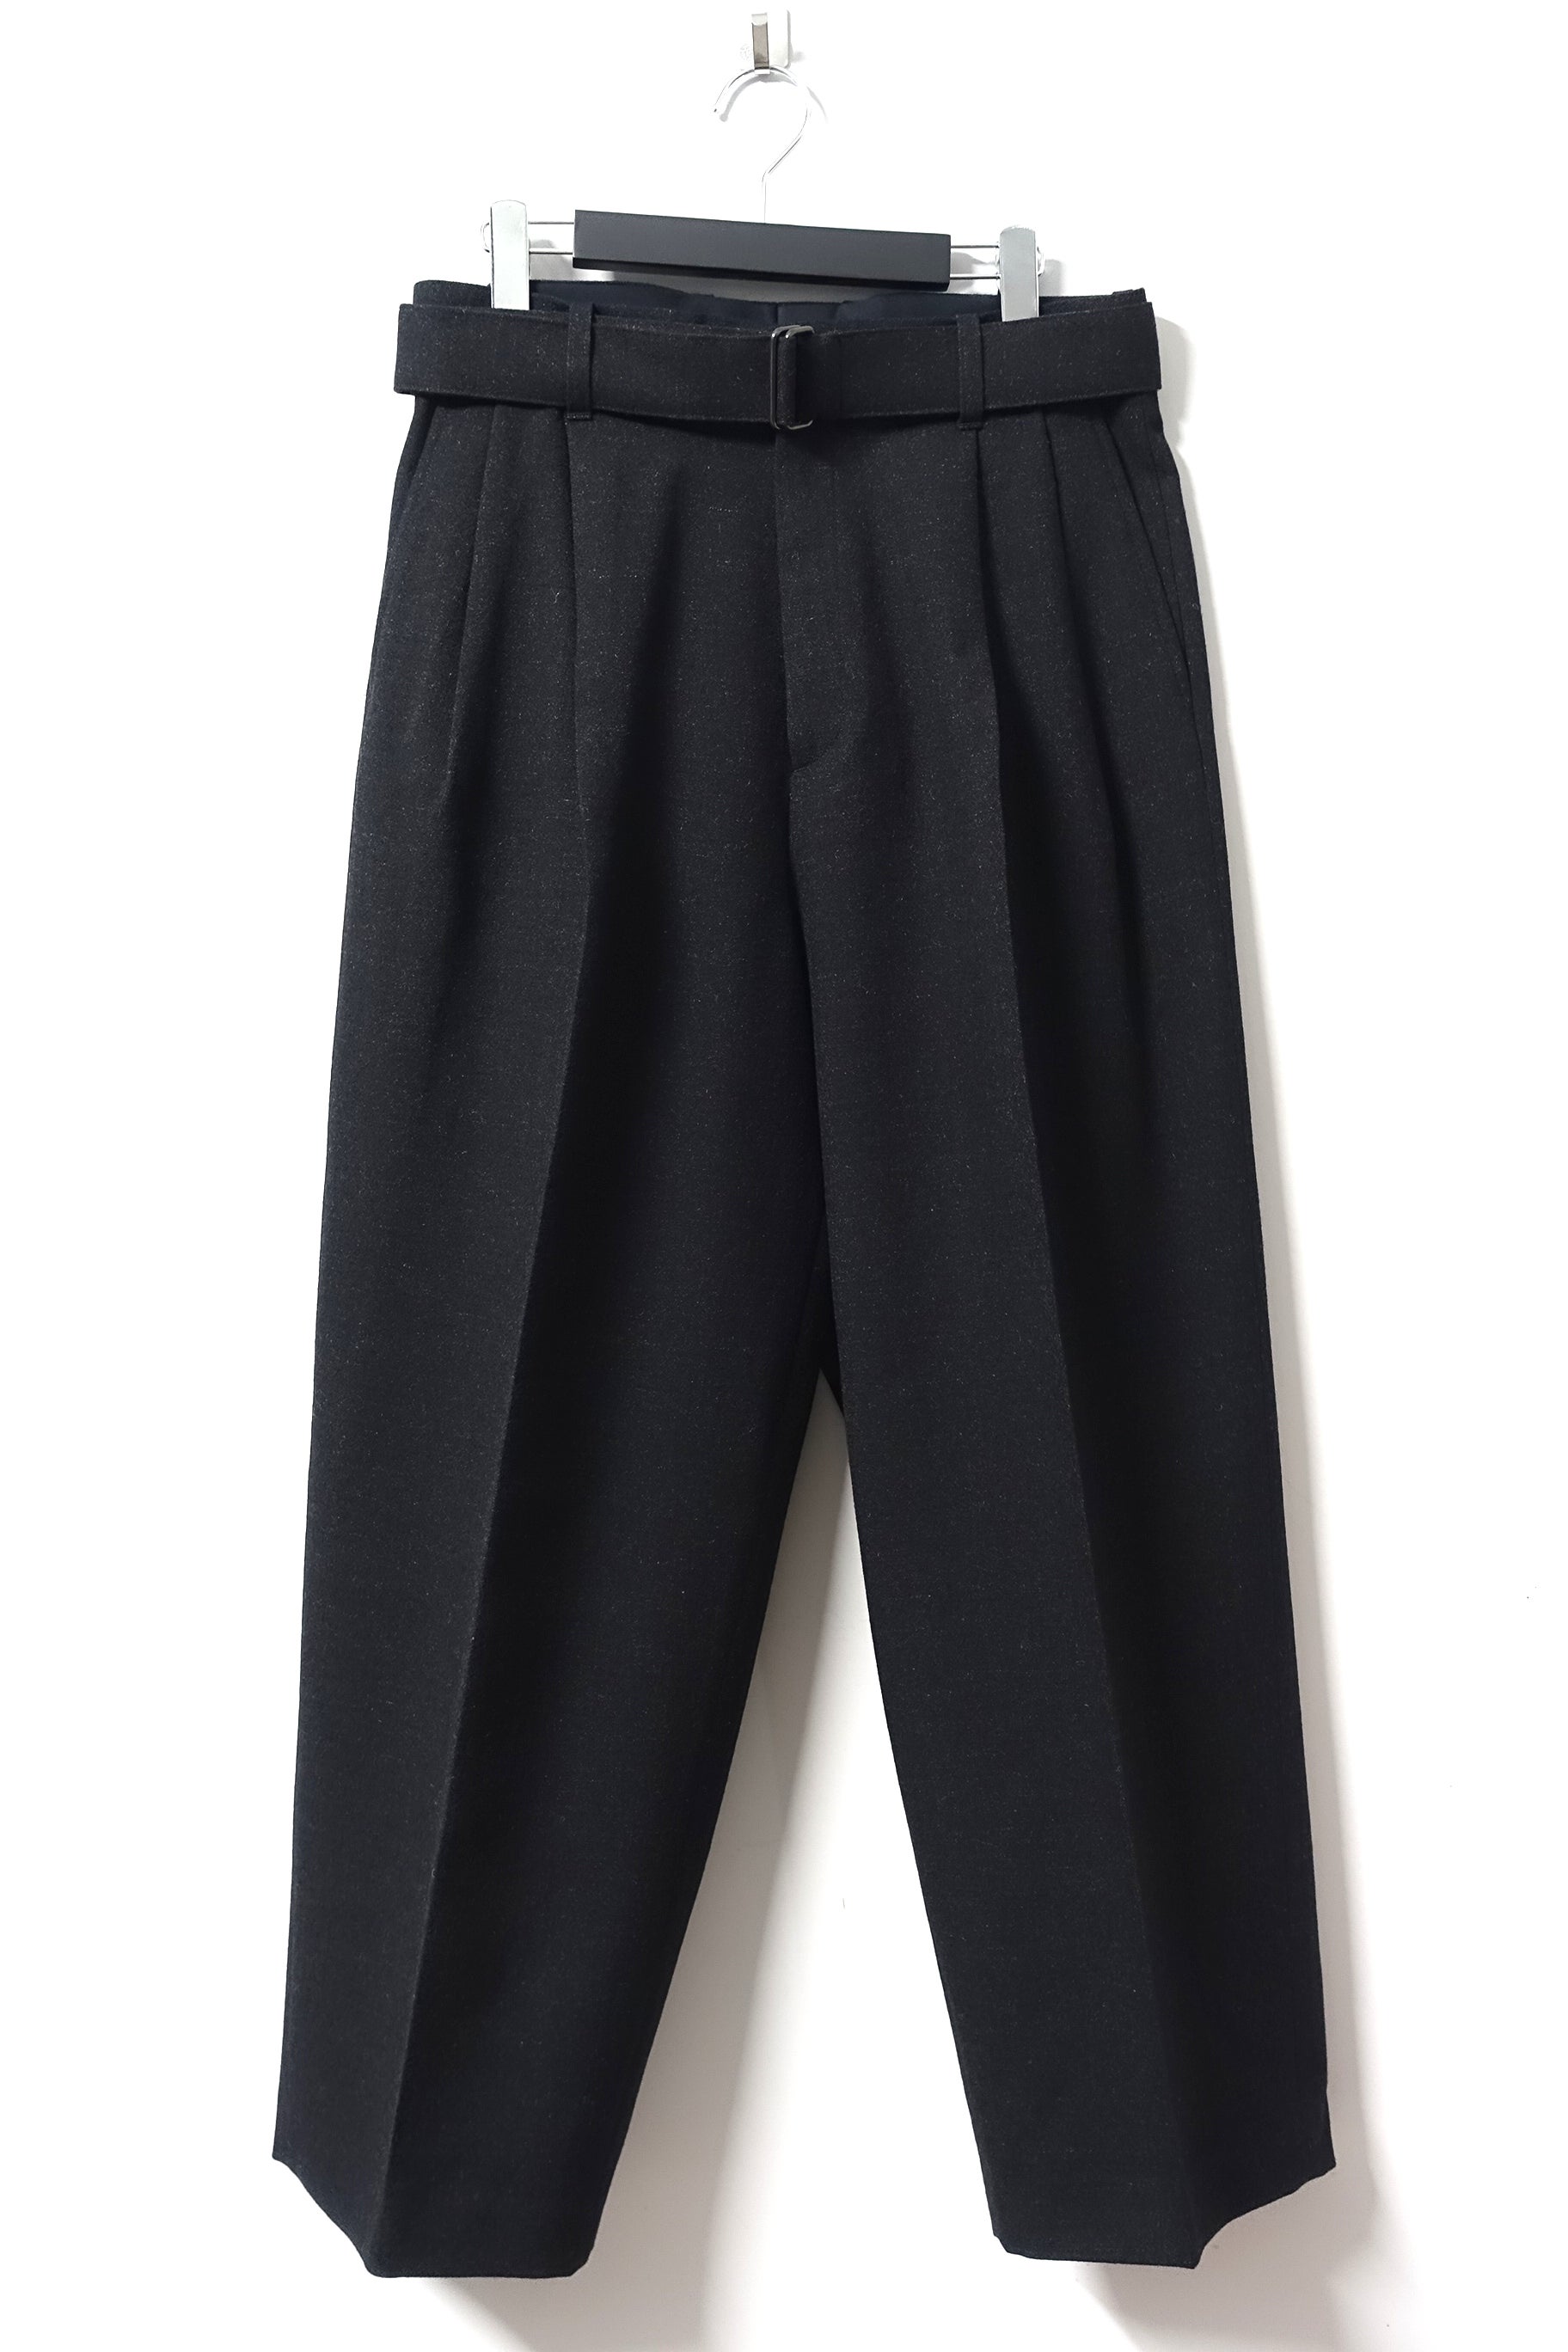 stein(シュタイン)/BELTED WIDE STRAIGHT TROUSERS/Black 通販